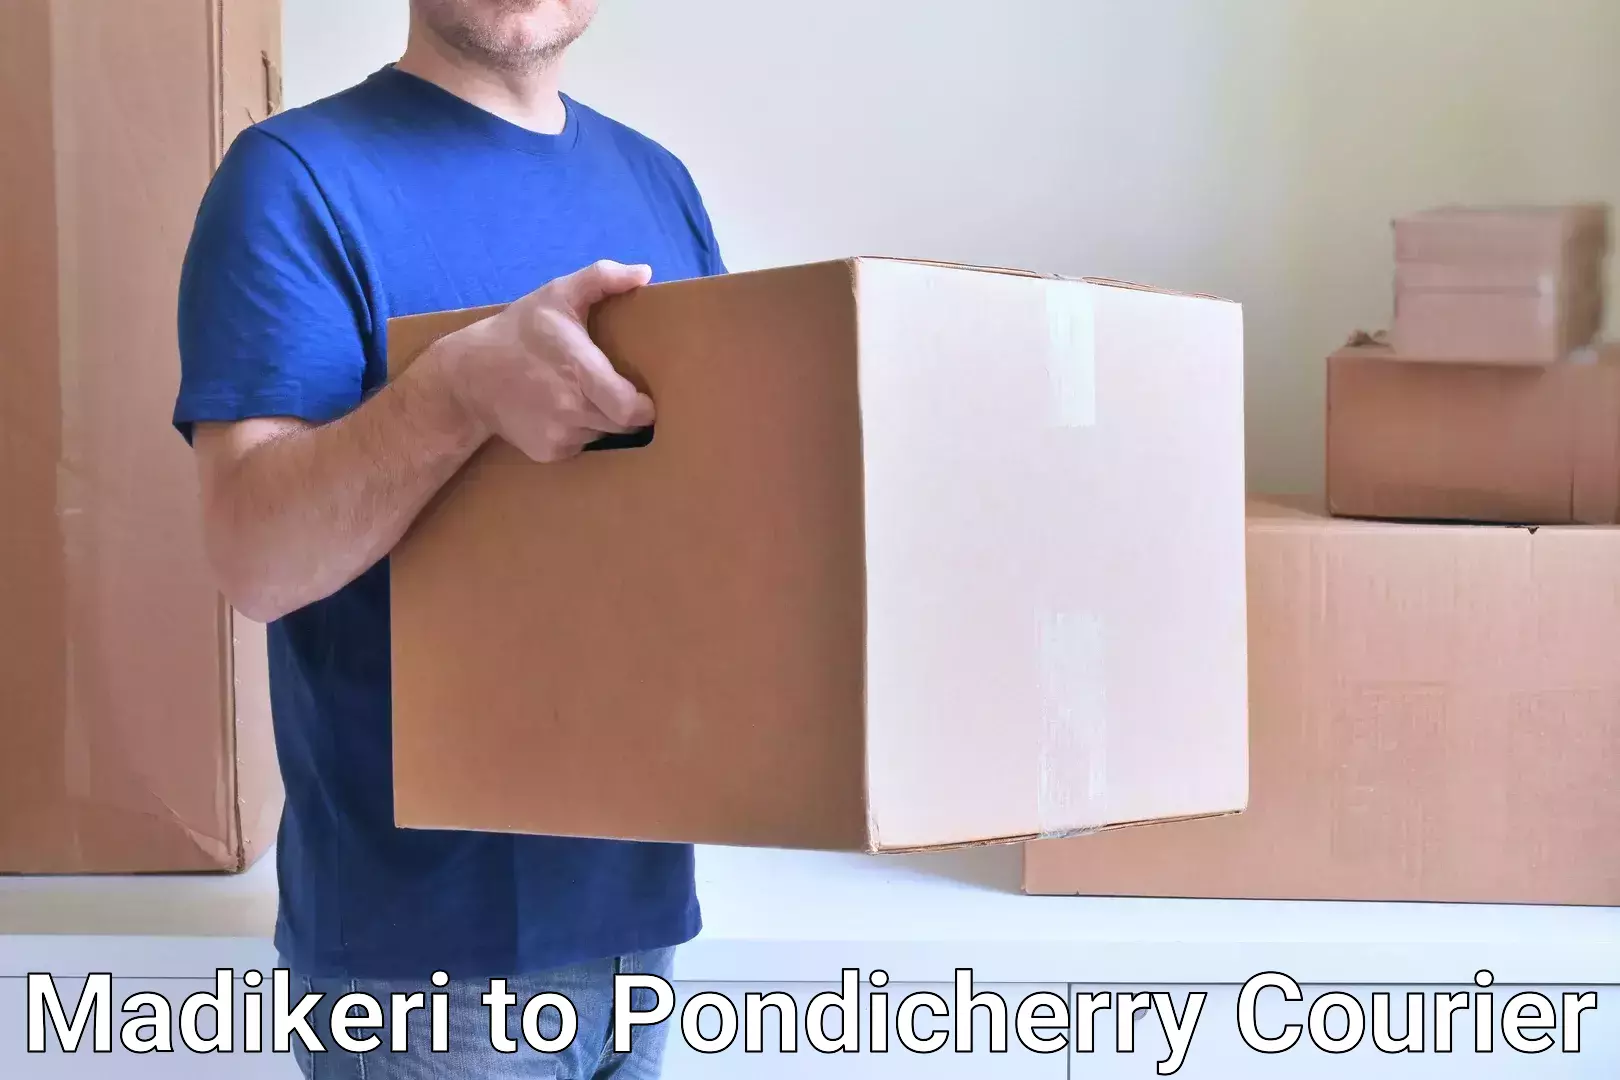 Global shipping solutions Madikeri to Pondicherry